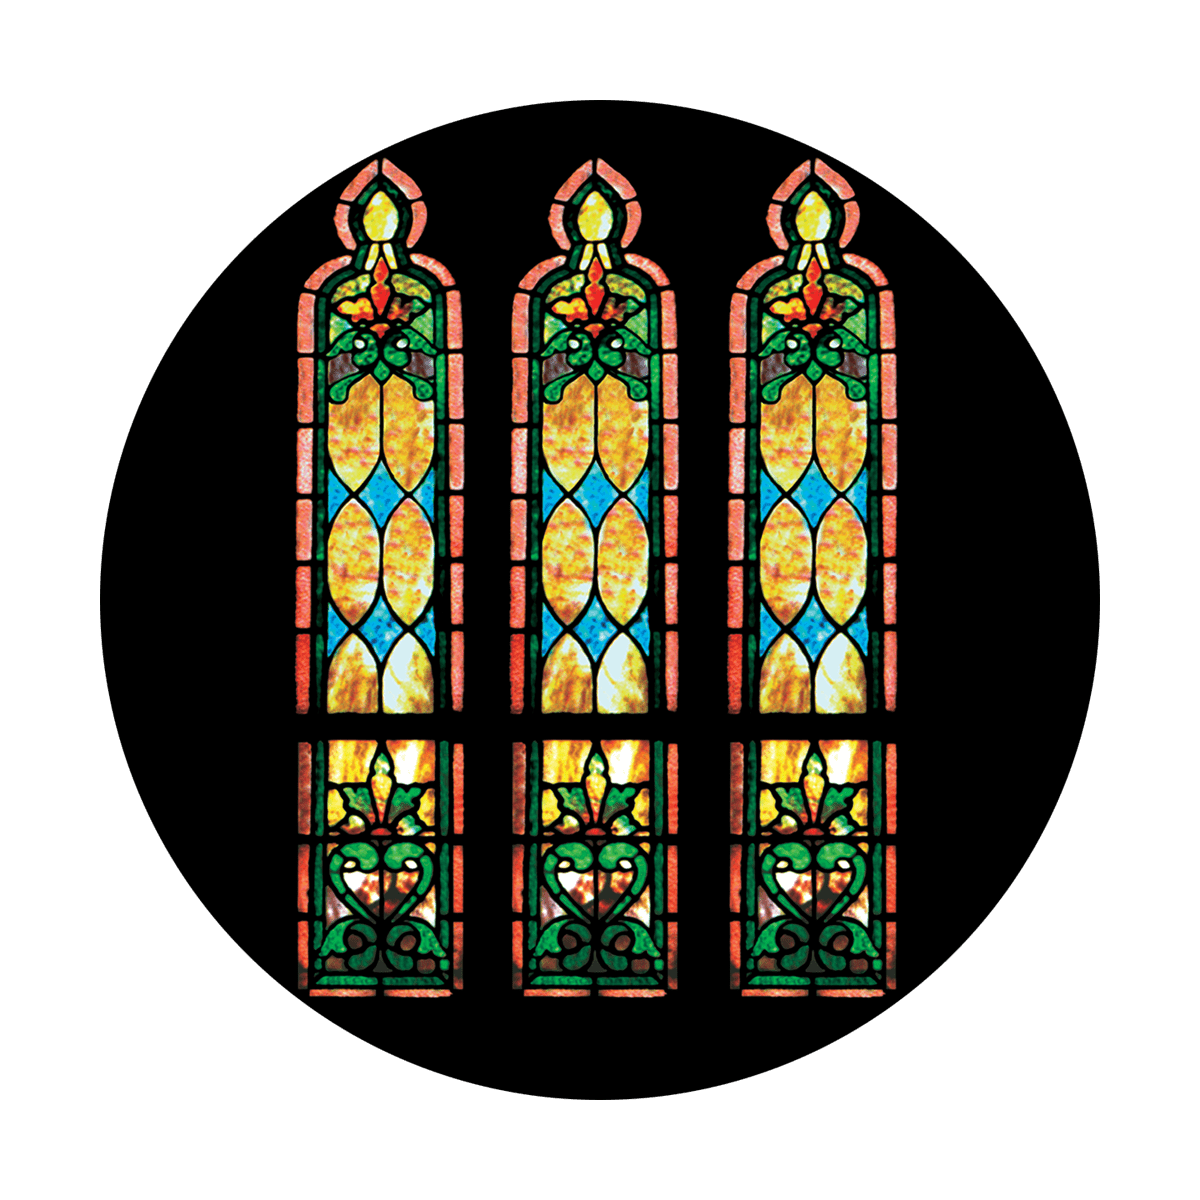 CS-0115 Stained Glass Windows Morning